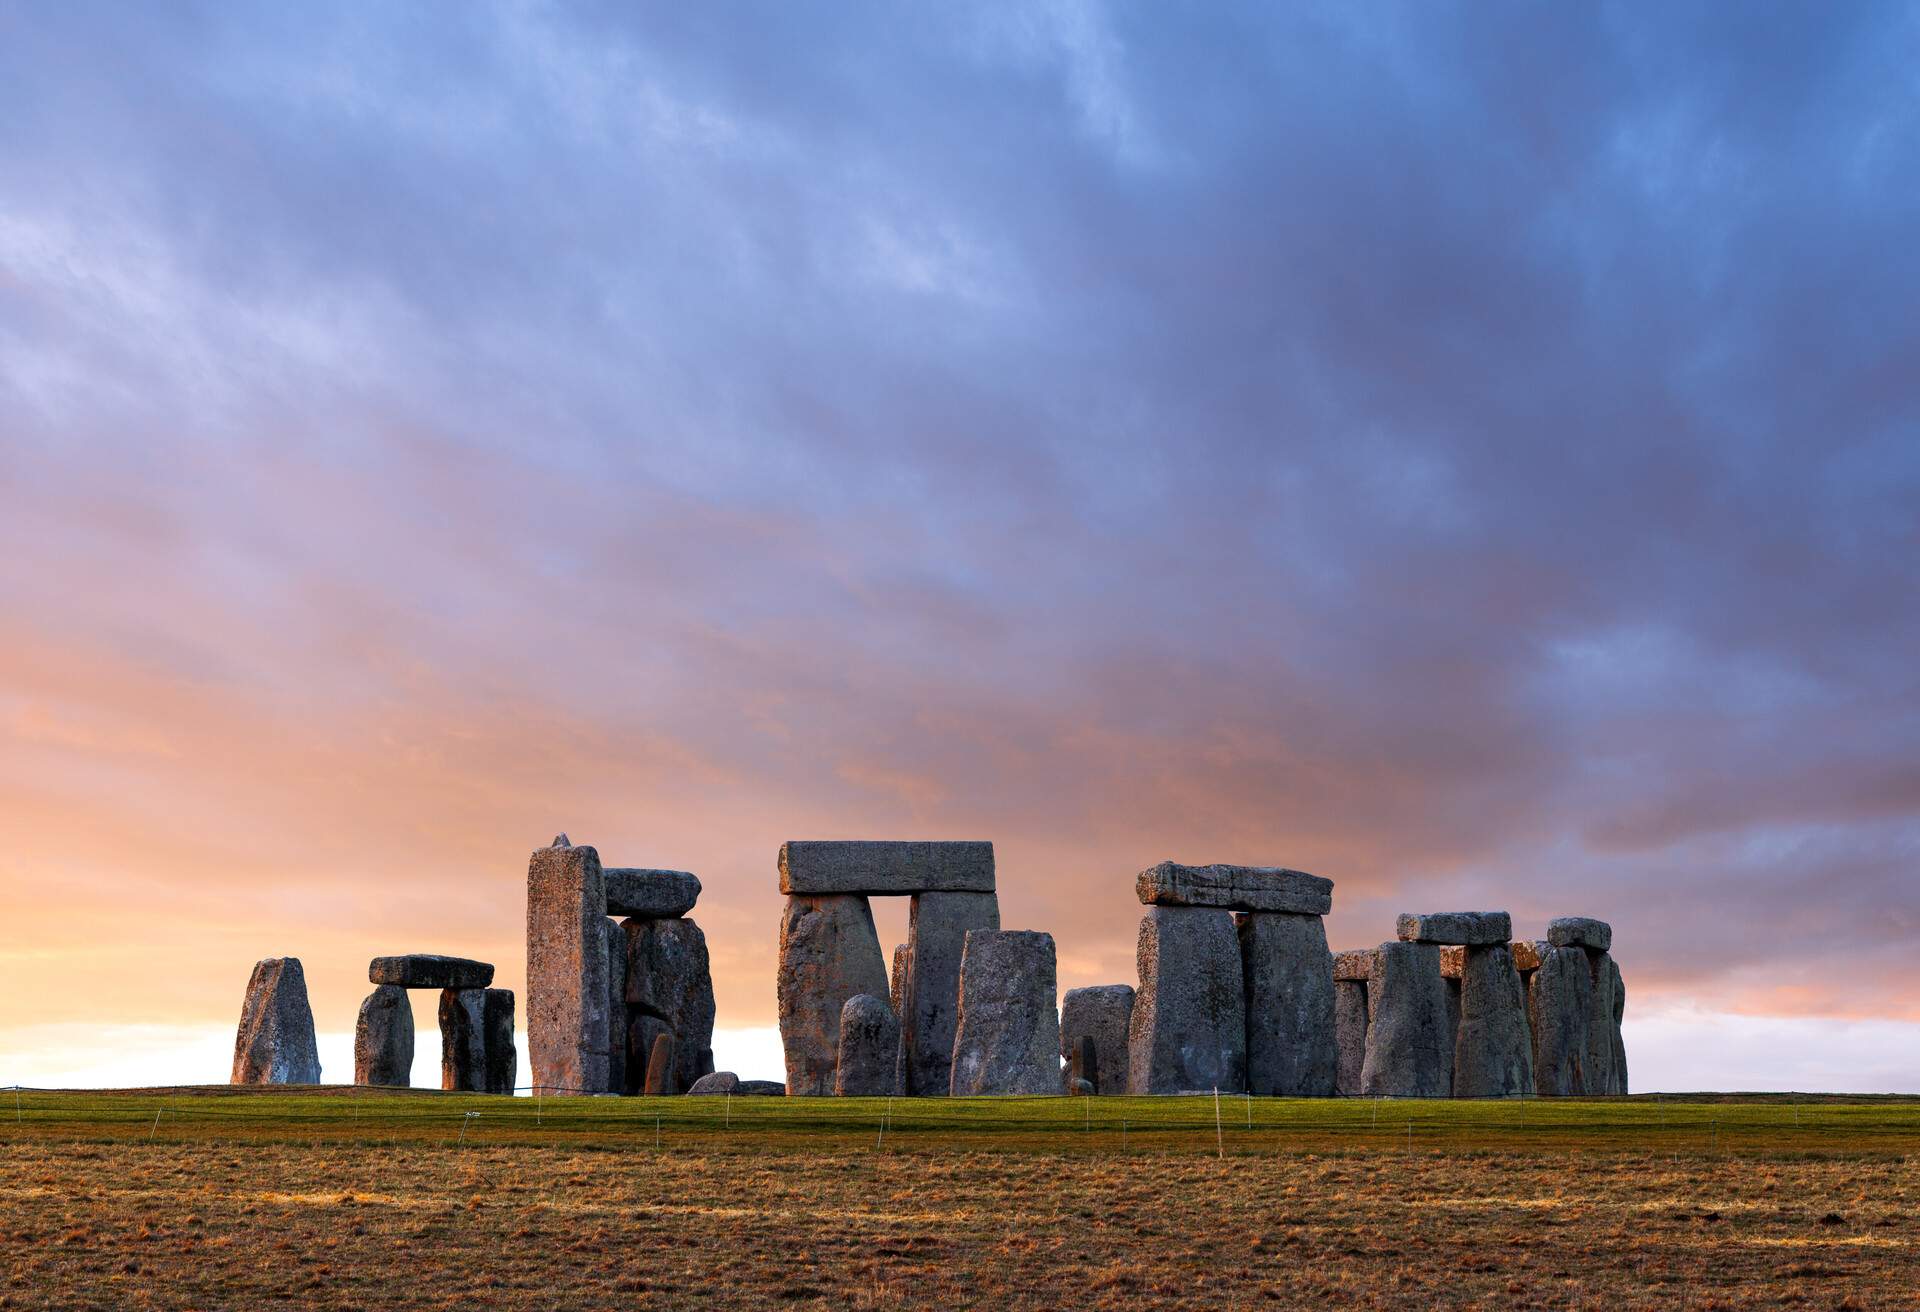 The iconic Stonehenge, a circle of enormous stones arranged like a doorway over a grassy field.